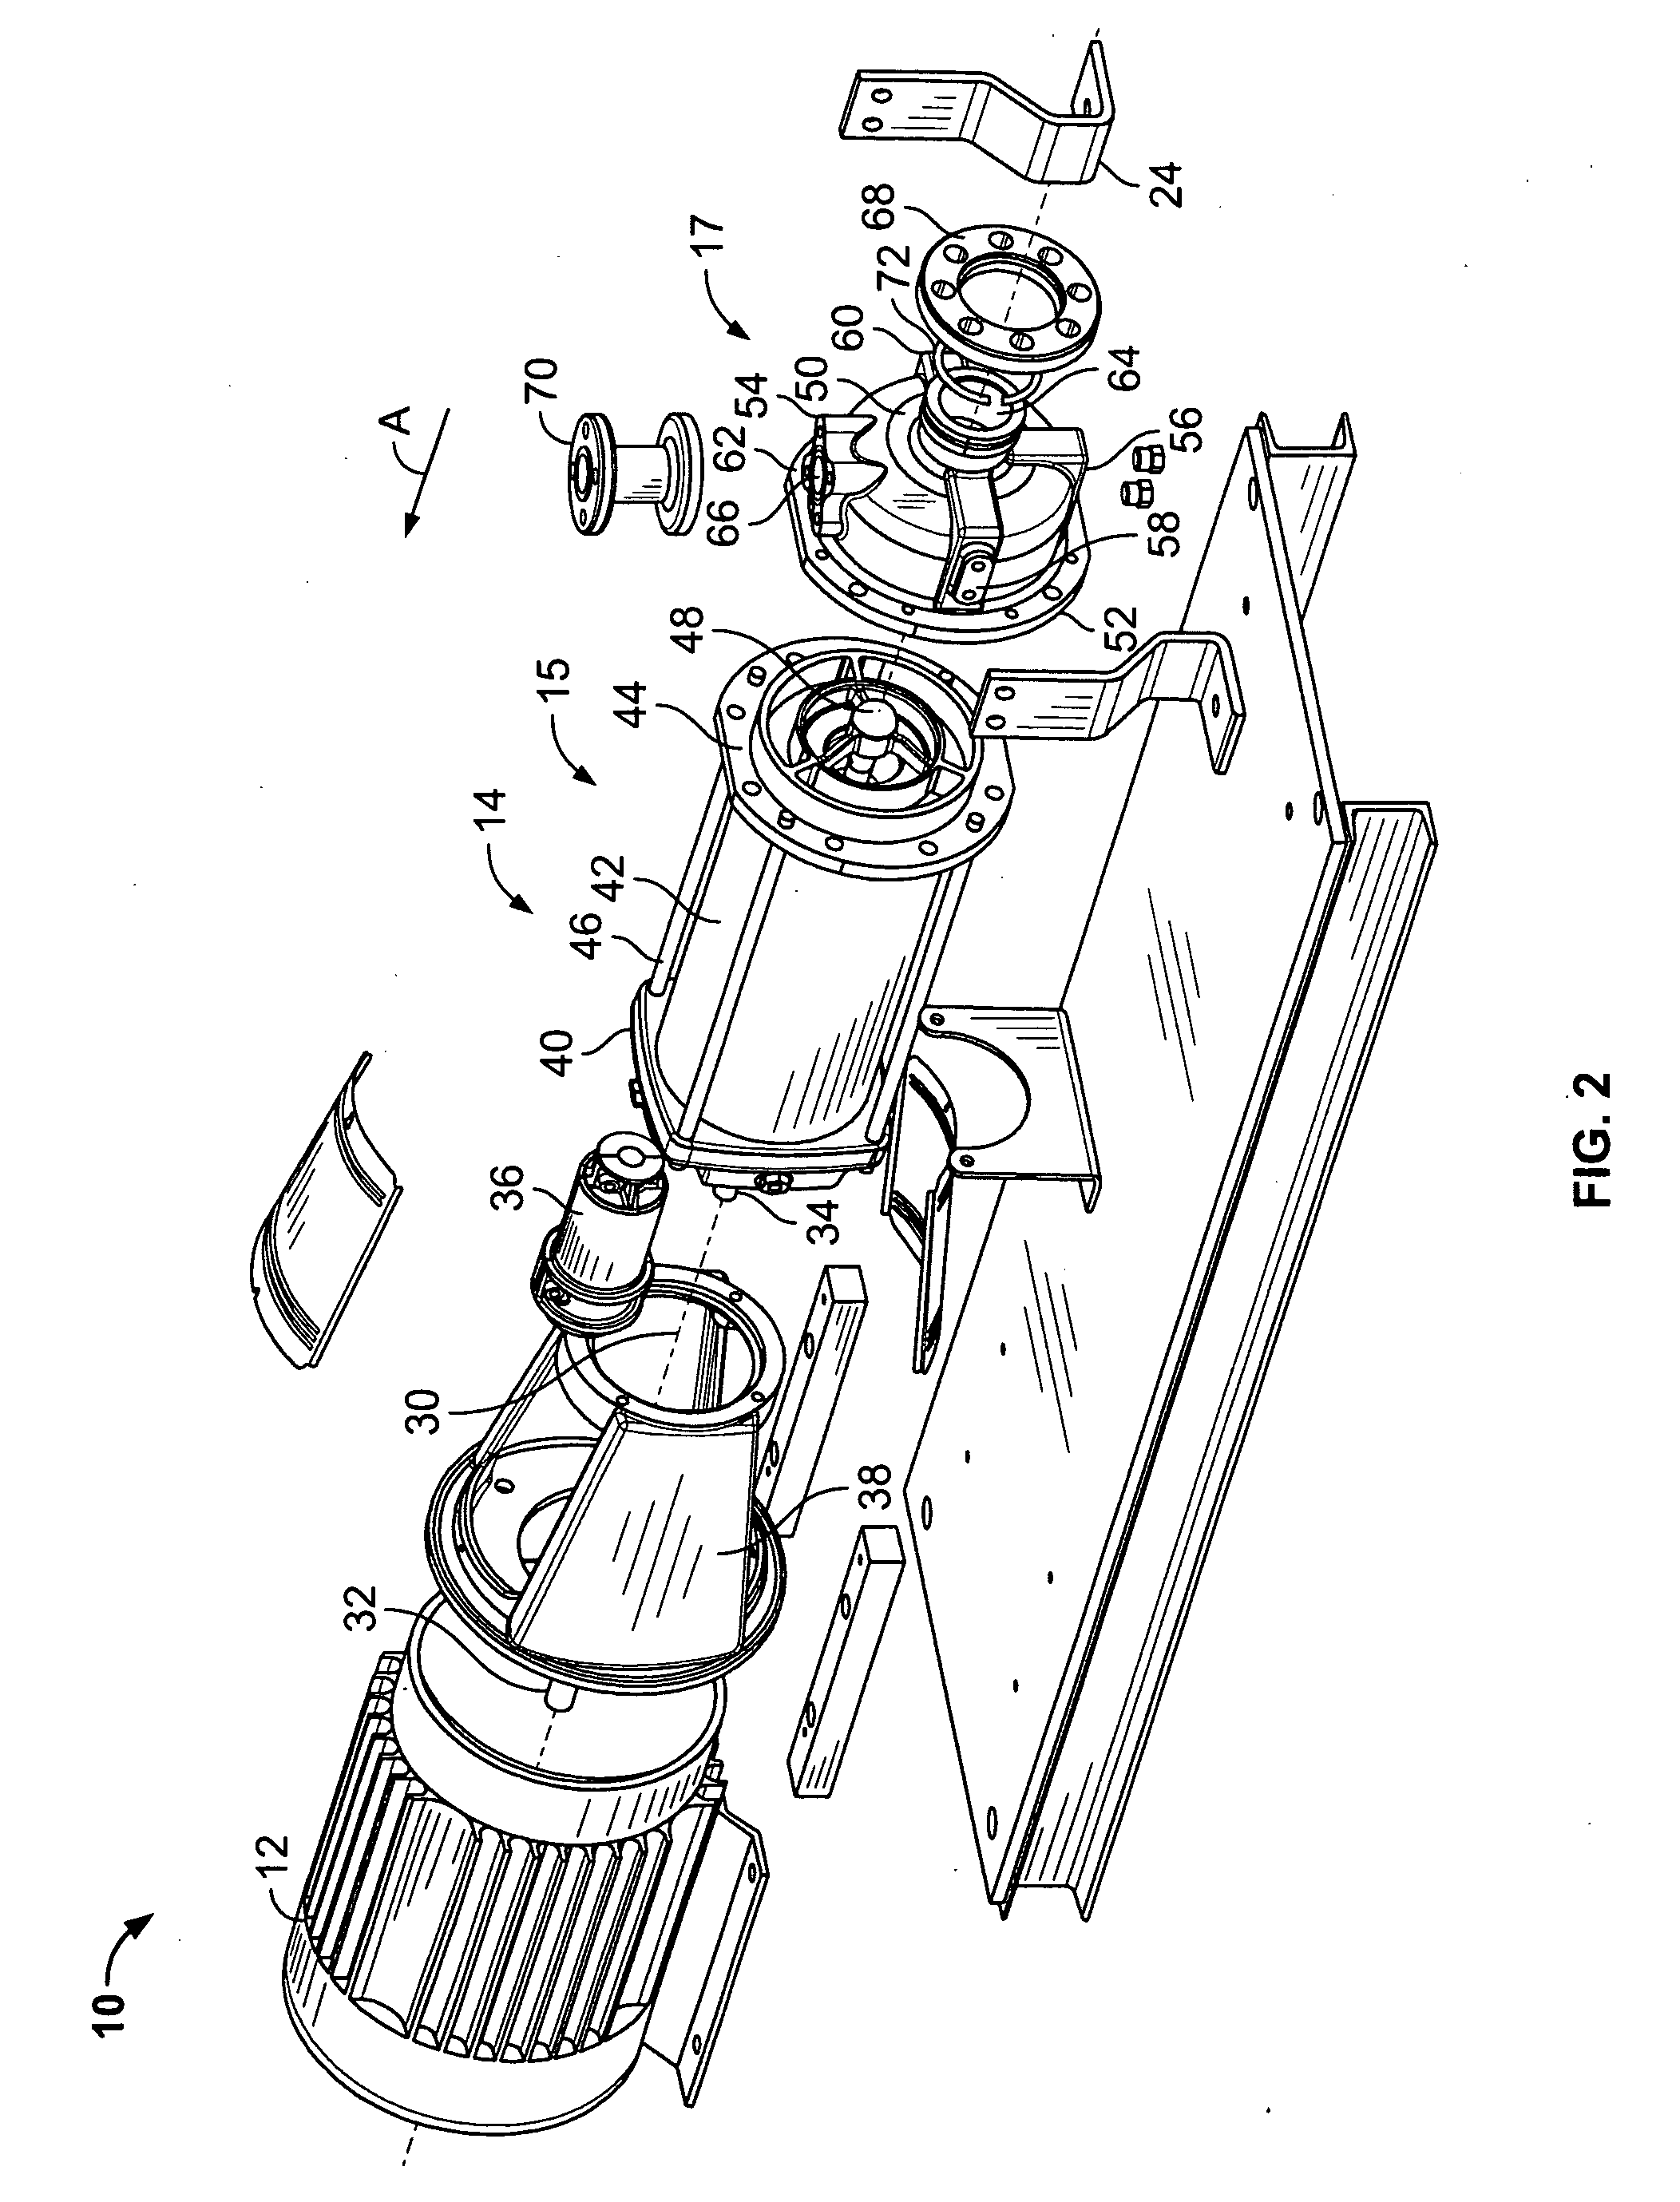 Multistage pump assembly having removable cartridge